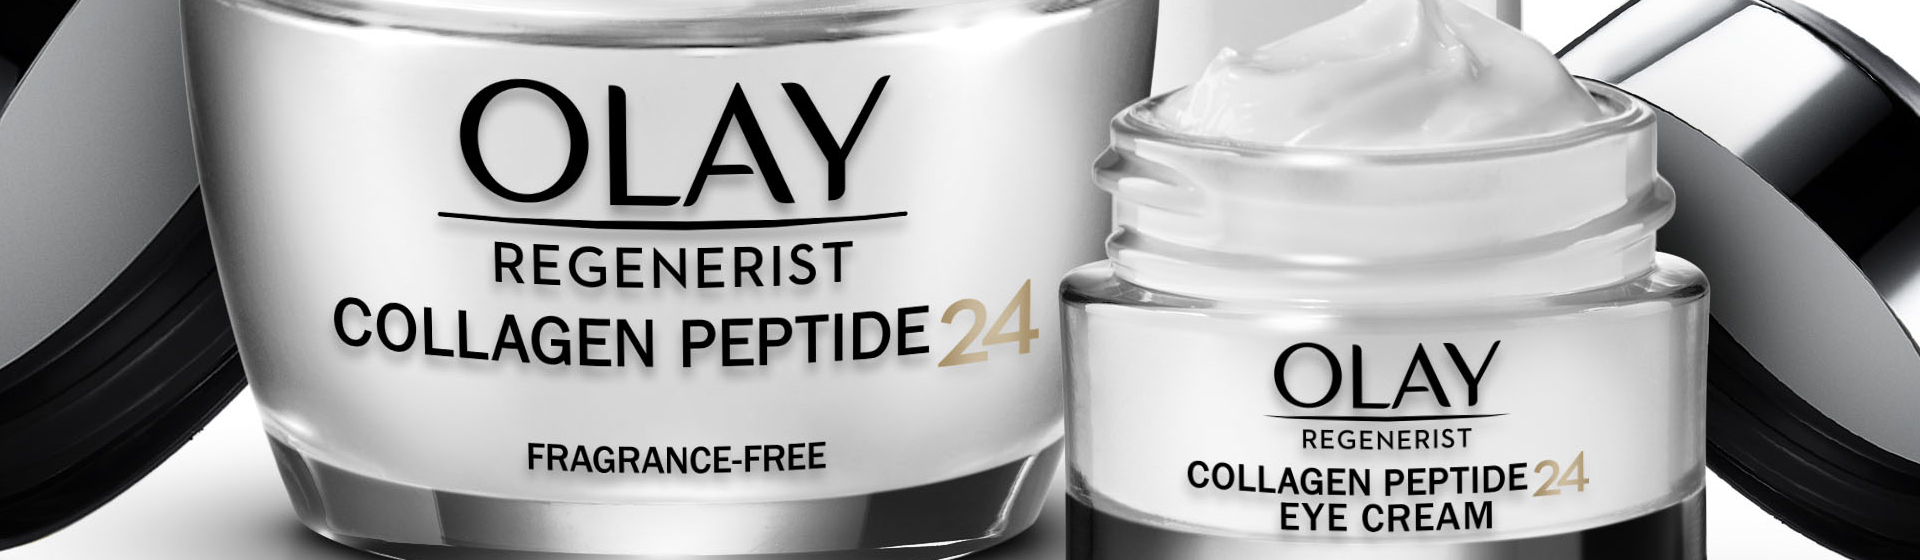 Olay Collagen Peptide 24 